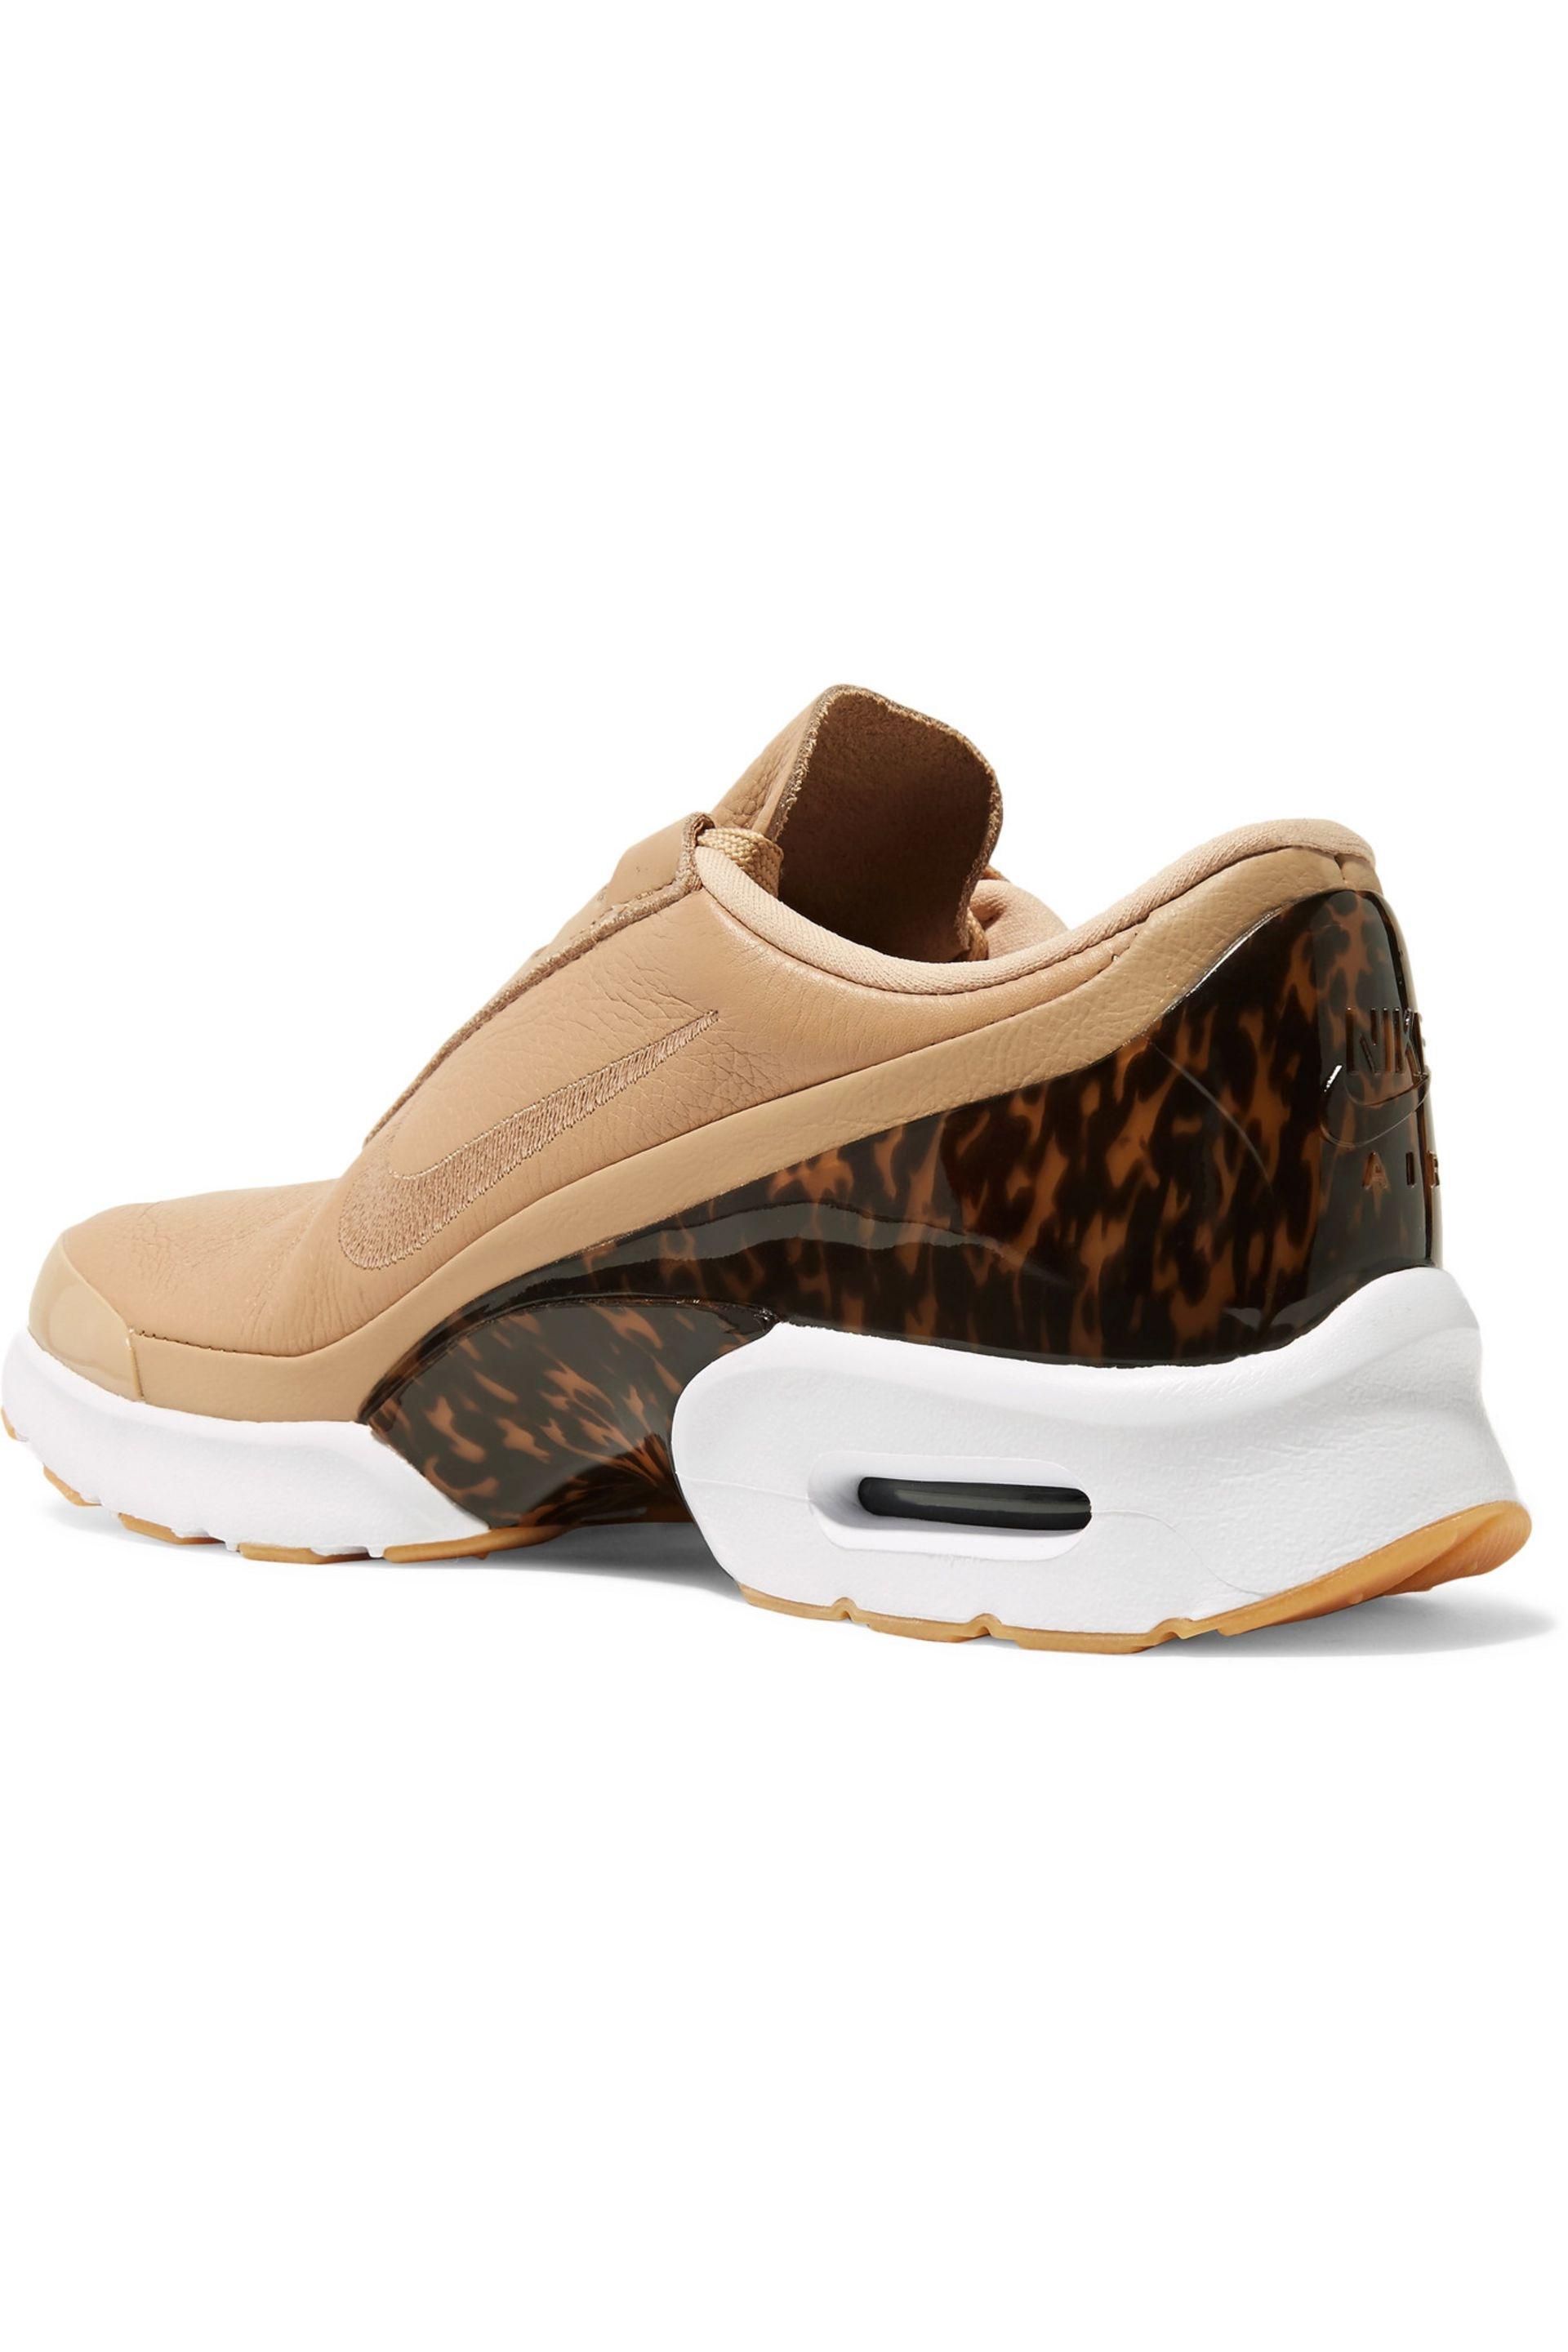 Nike Air Max Jewell Lx Leather And Tortoiseshell Plastic Sneakers in Beige  (Natural) | Lyst